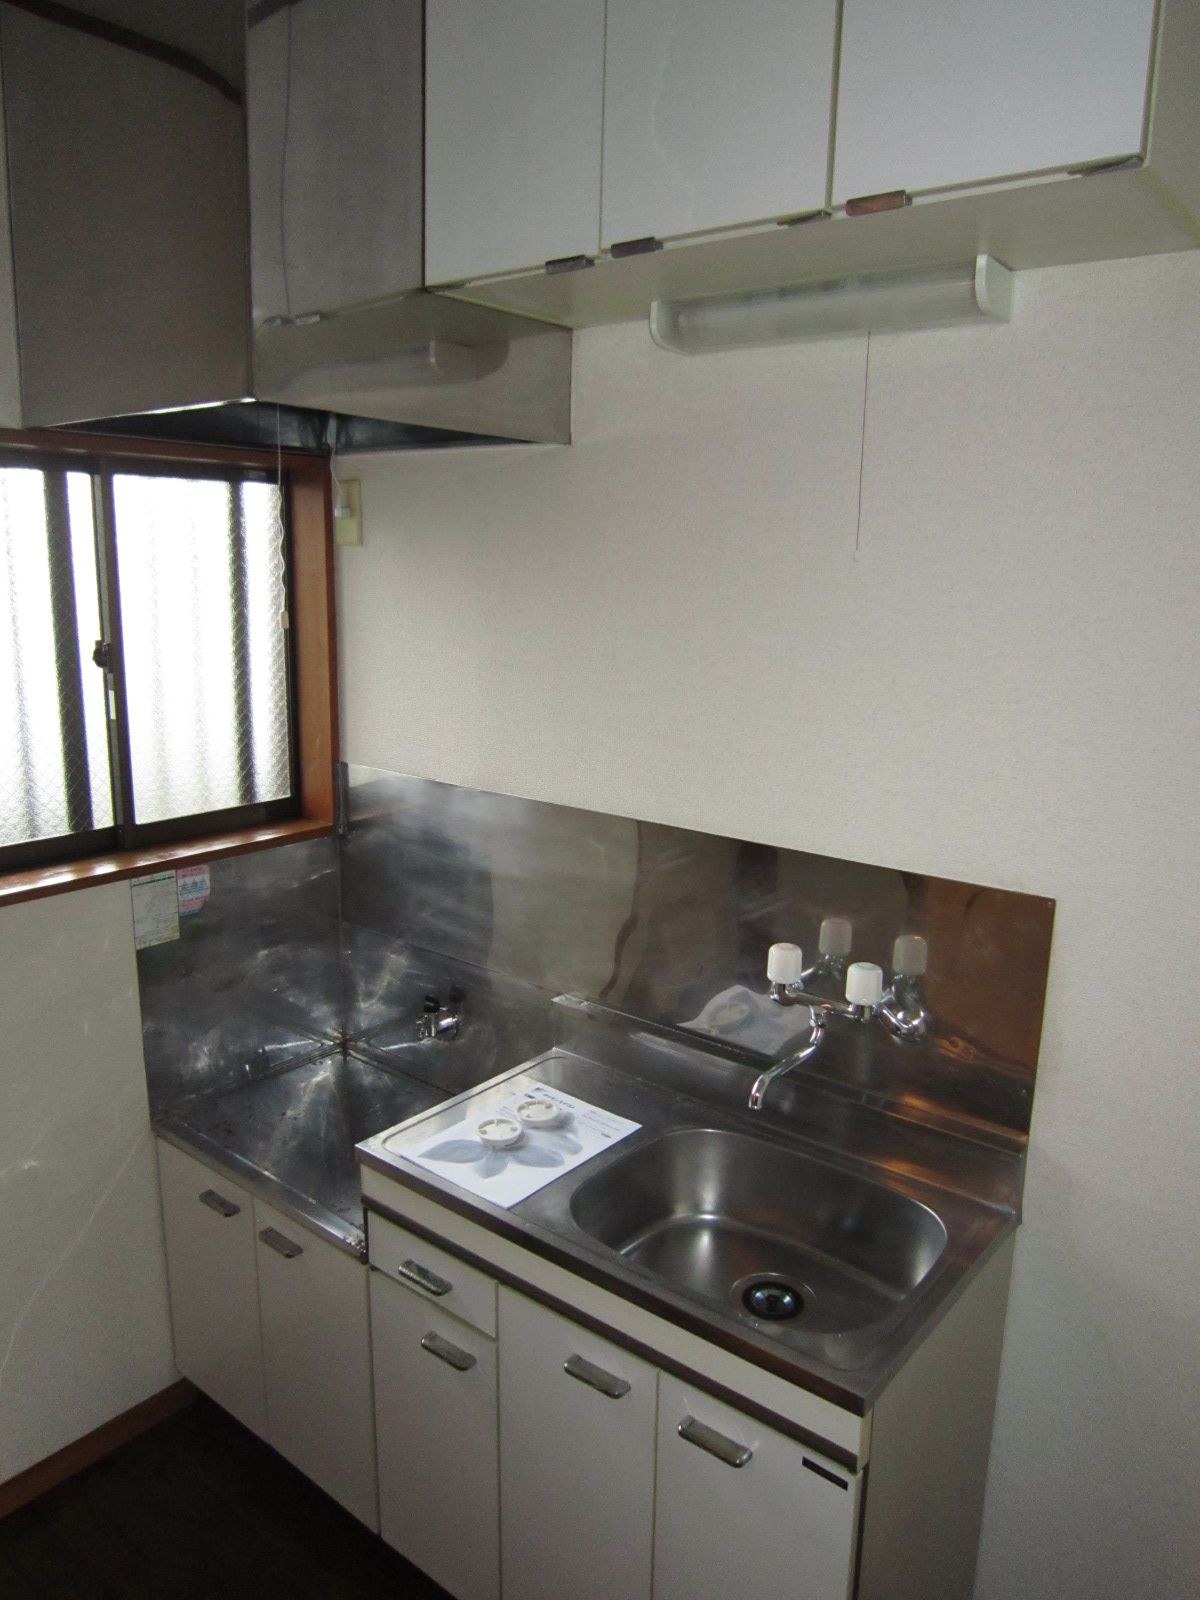 Kitchen. It spreads the width of the dishes in the gas stove correspondence of kitchen